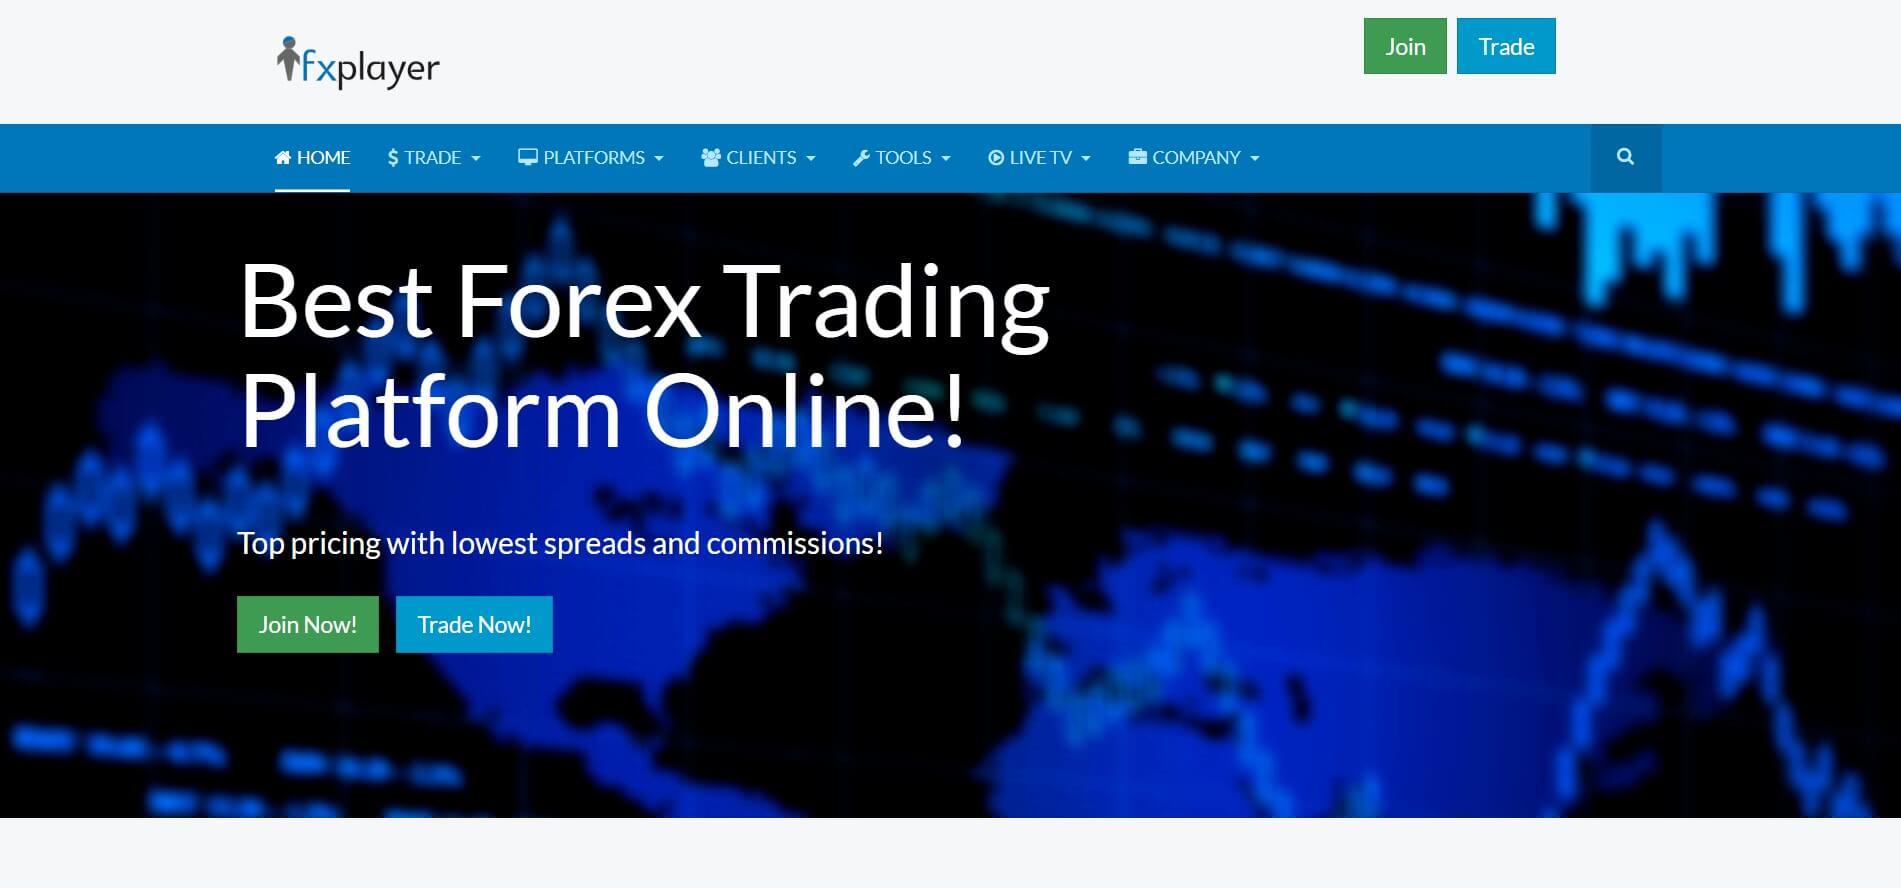 The Forex Player Review | Forex Academy